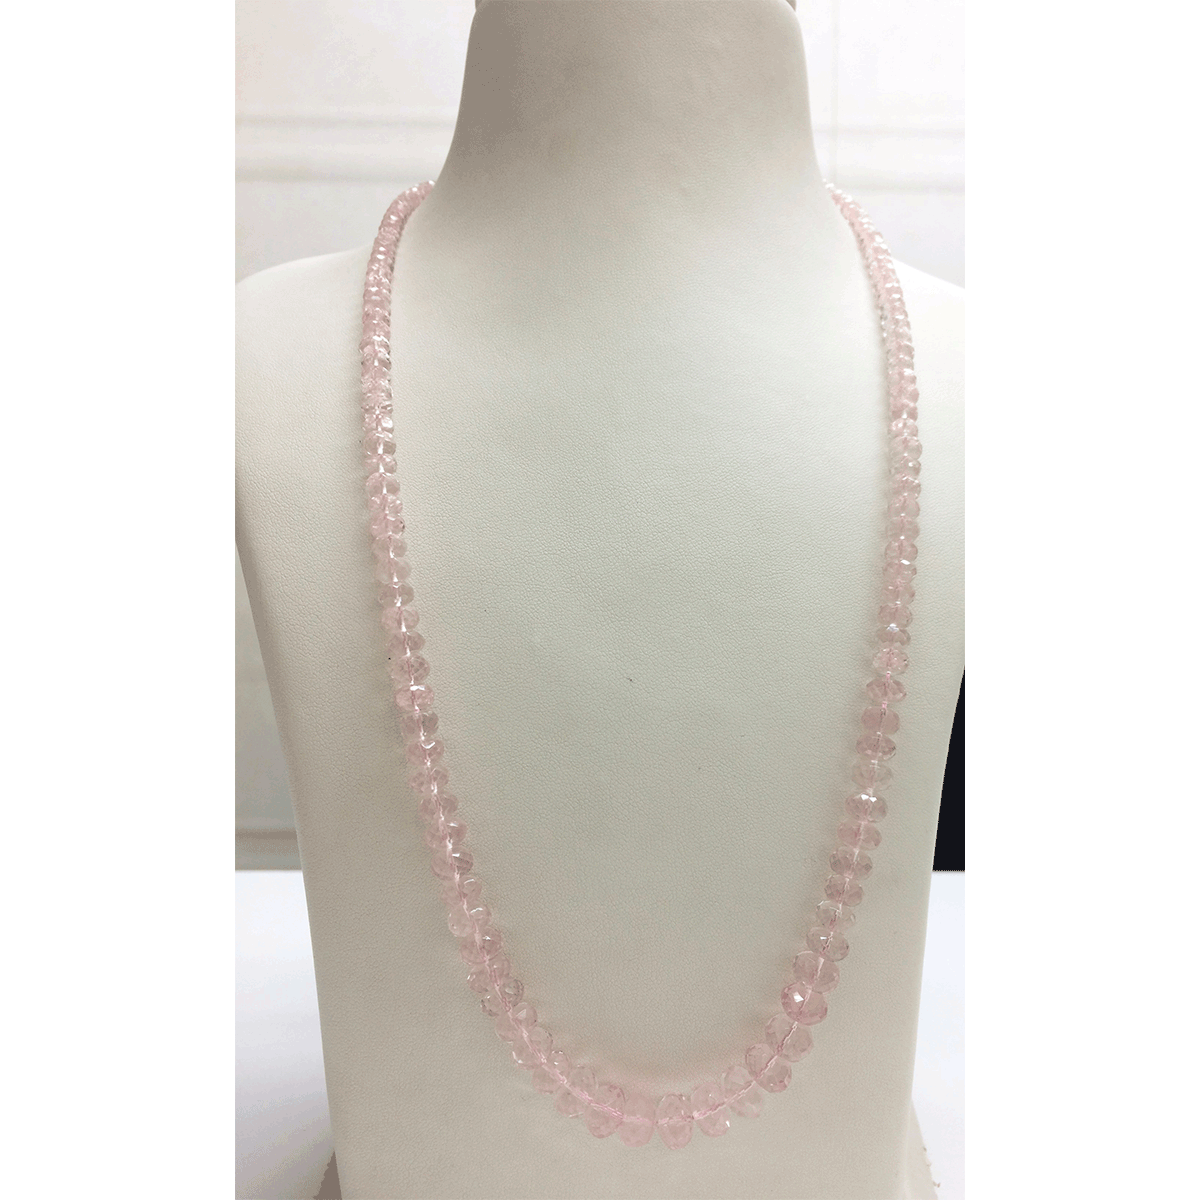 2 Layer Flat Oval Glass Beads Necklace With Lakshmi Pendant, Light Pink